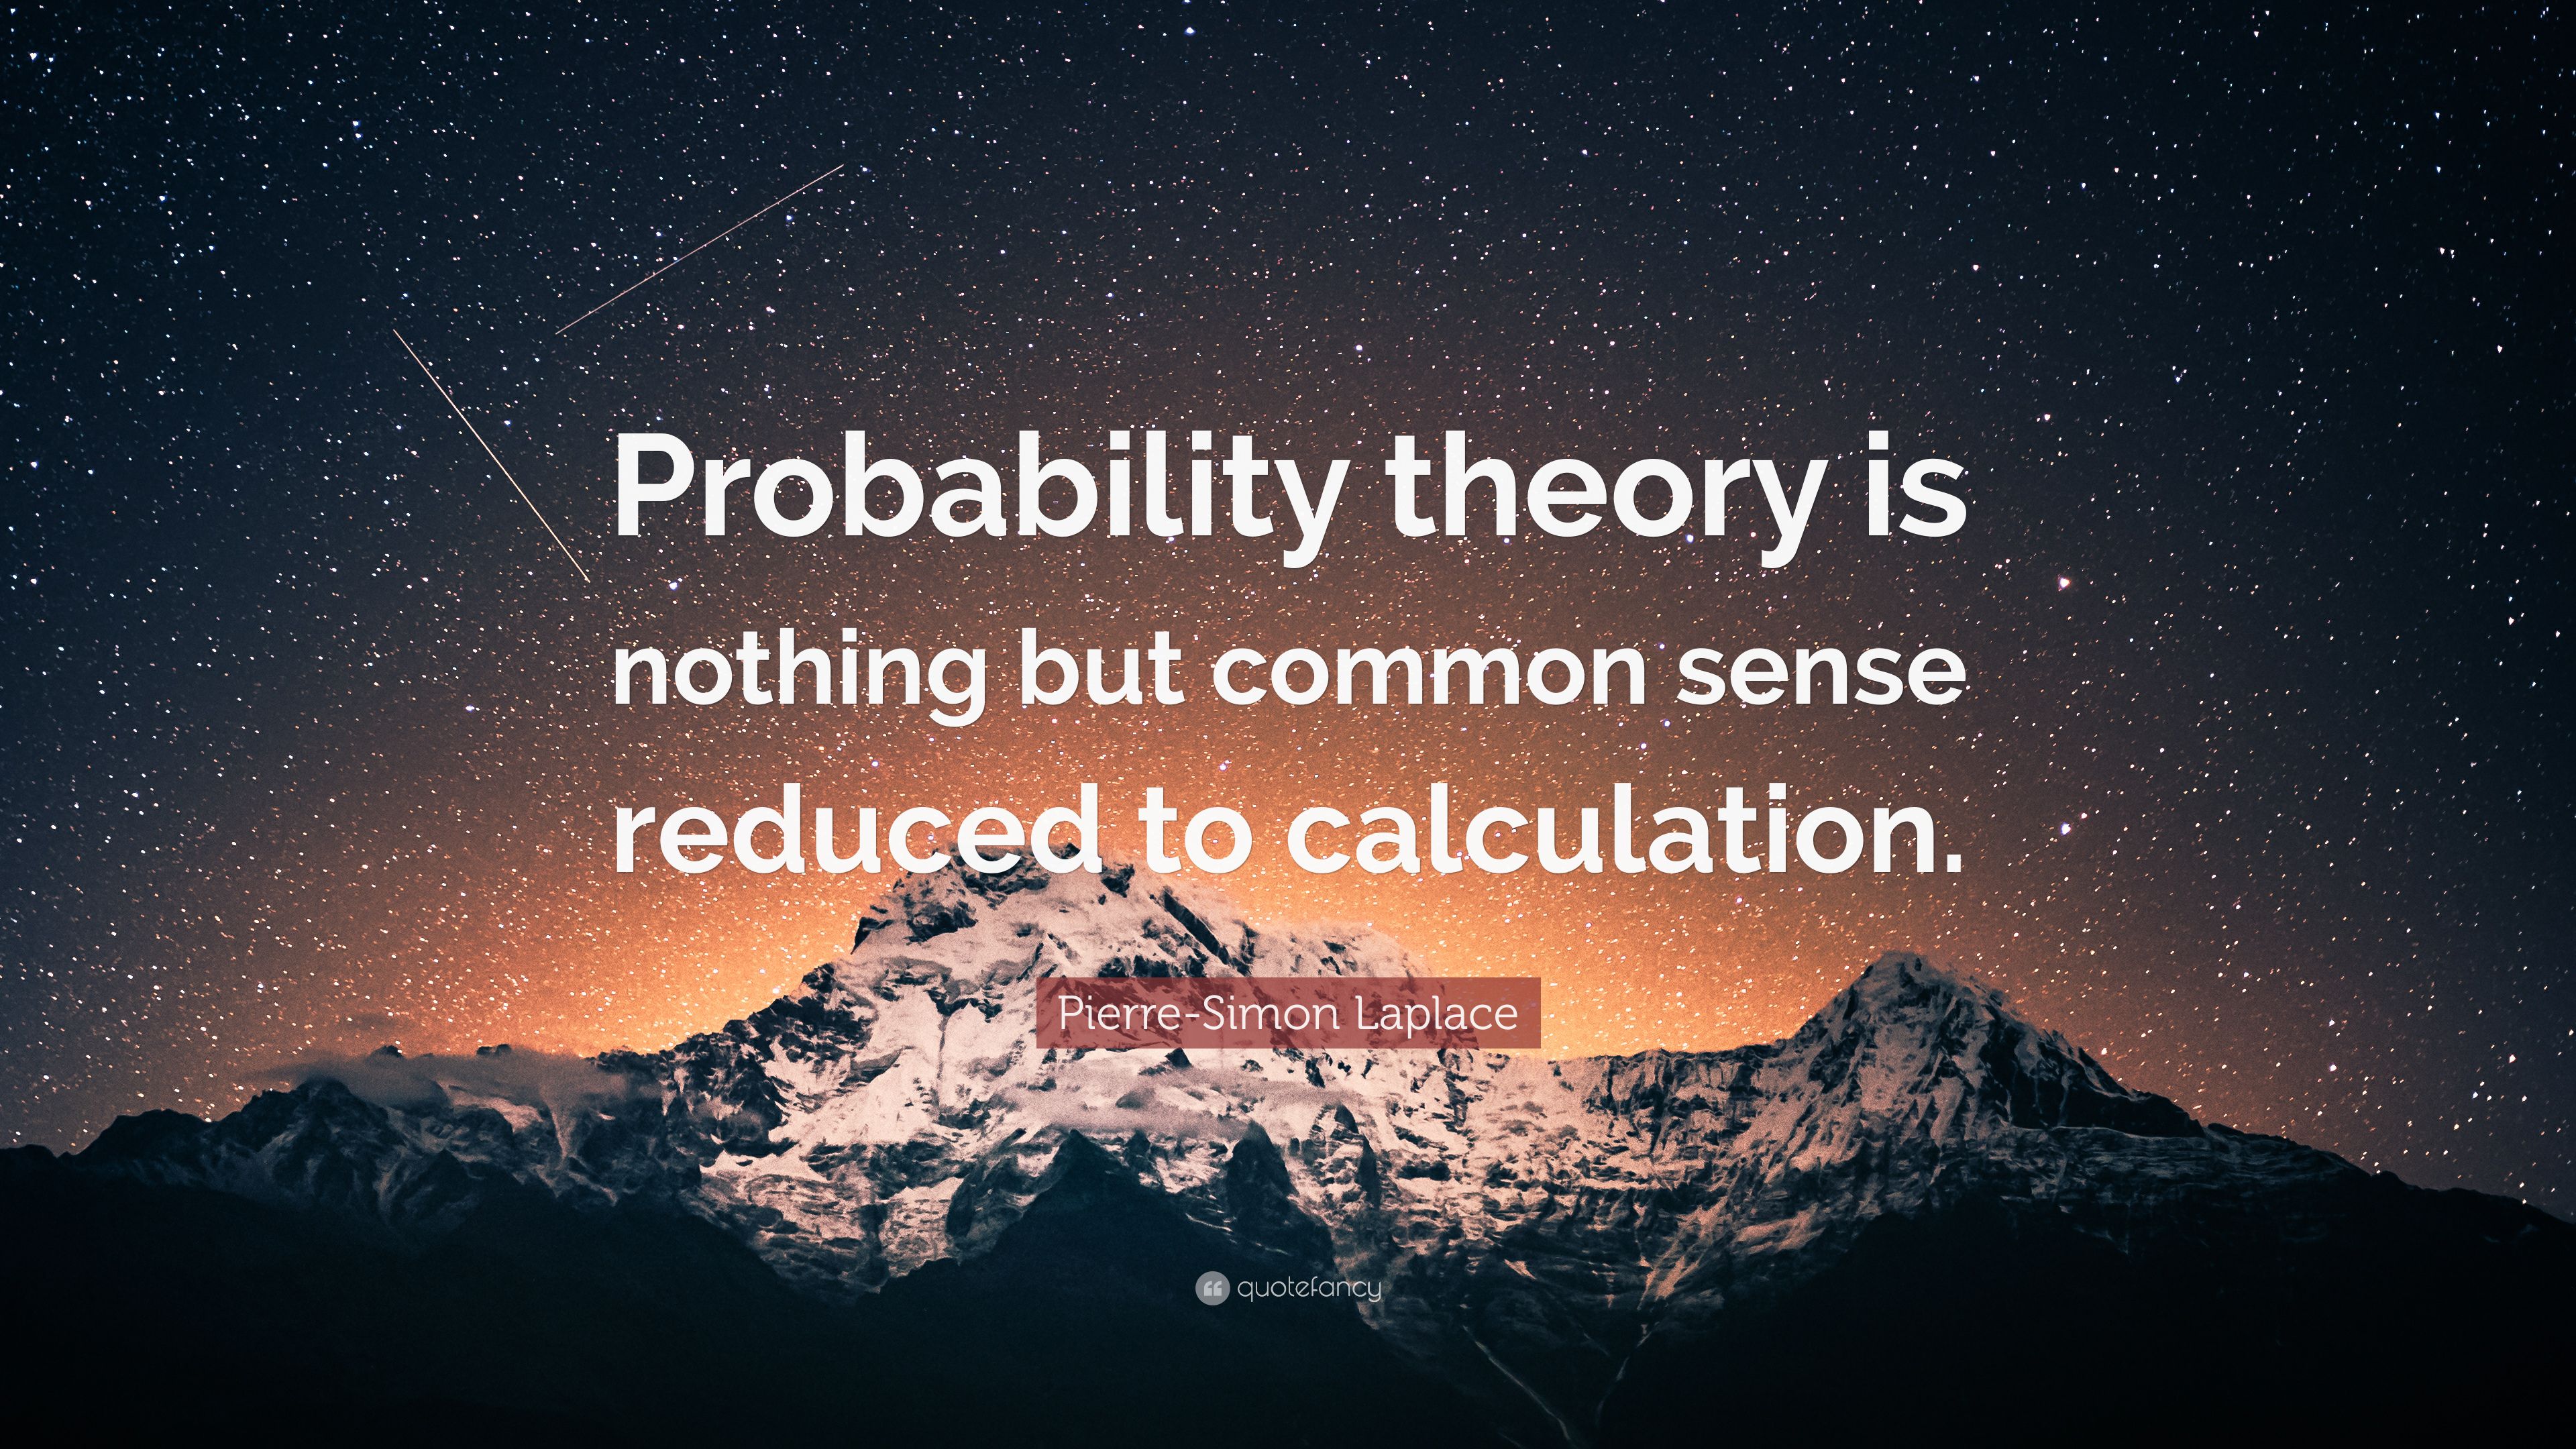 Pierre Simon Laplace Quote: “Probability Theory Is Nothing But Common Sense Reduced To Calculation.” (9 Wallpaper)